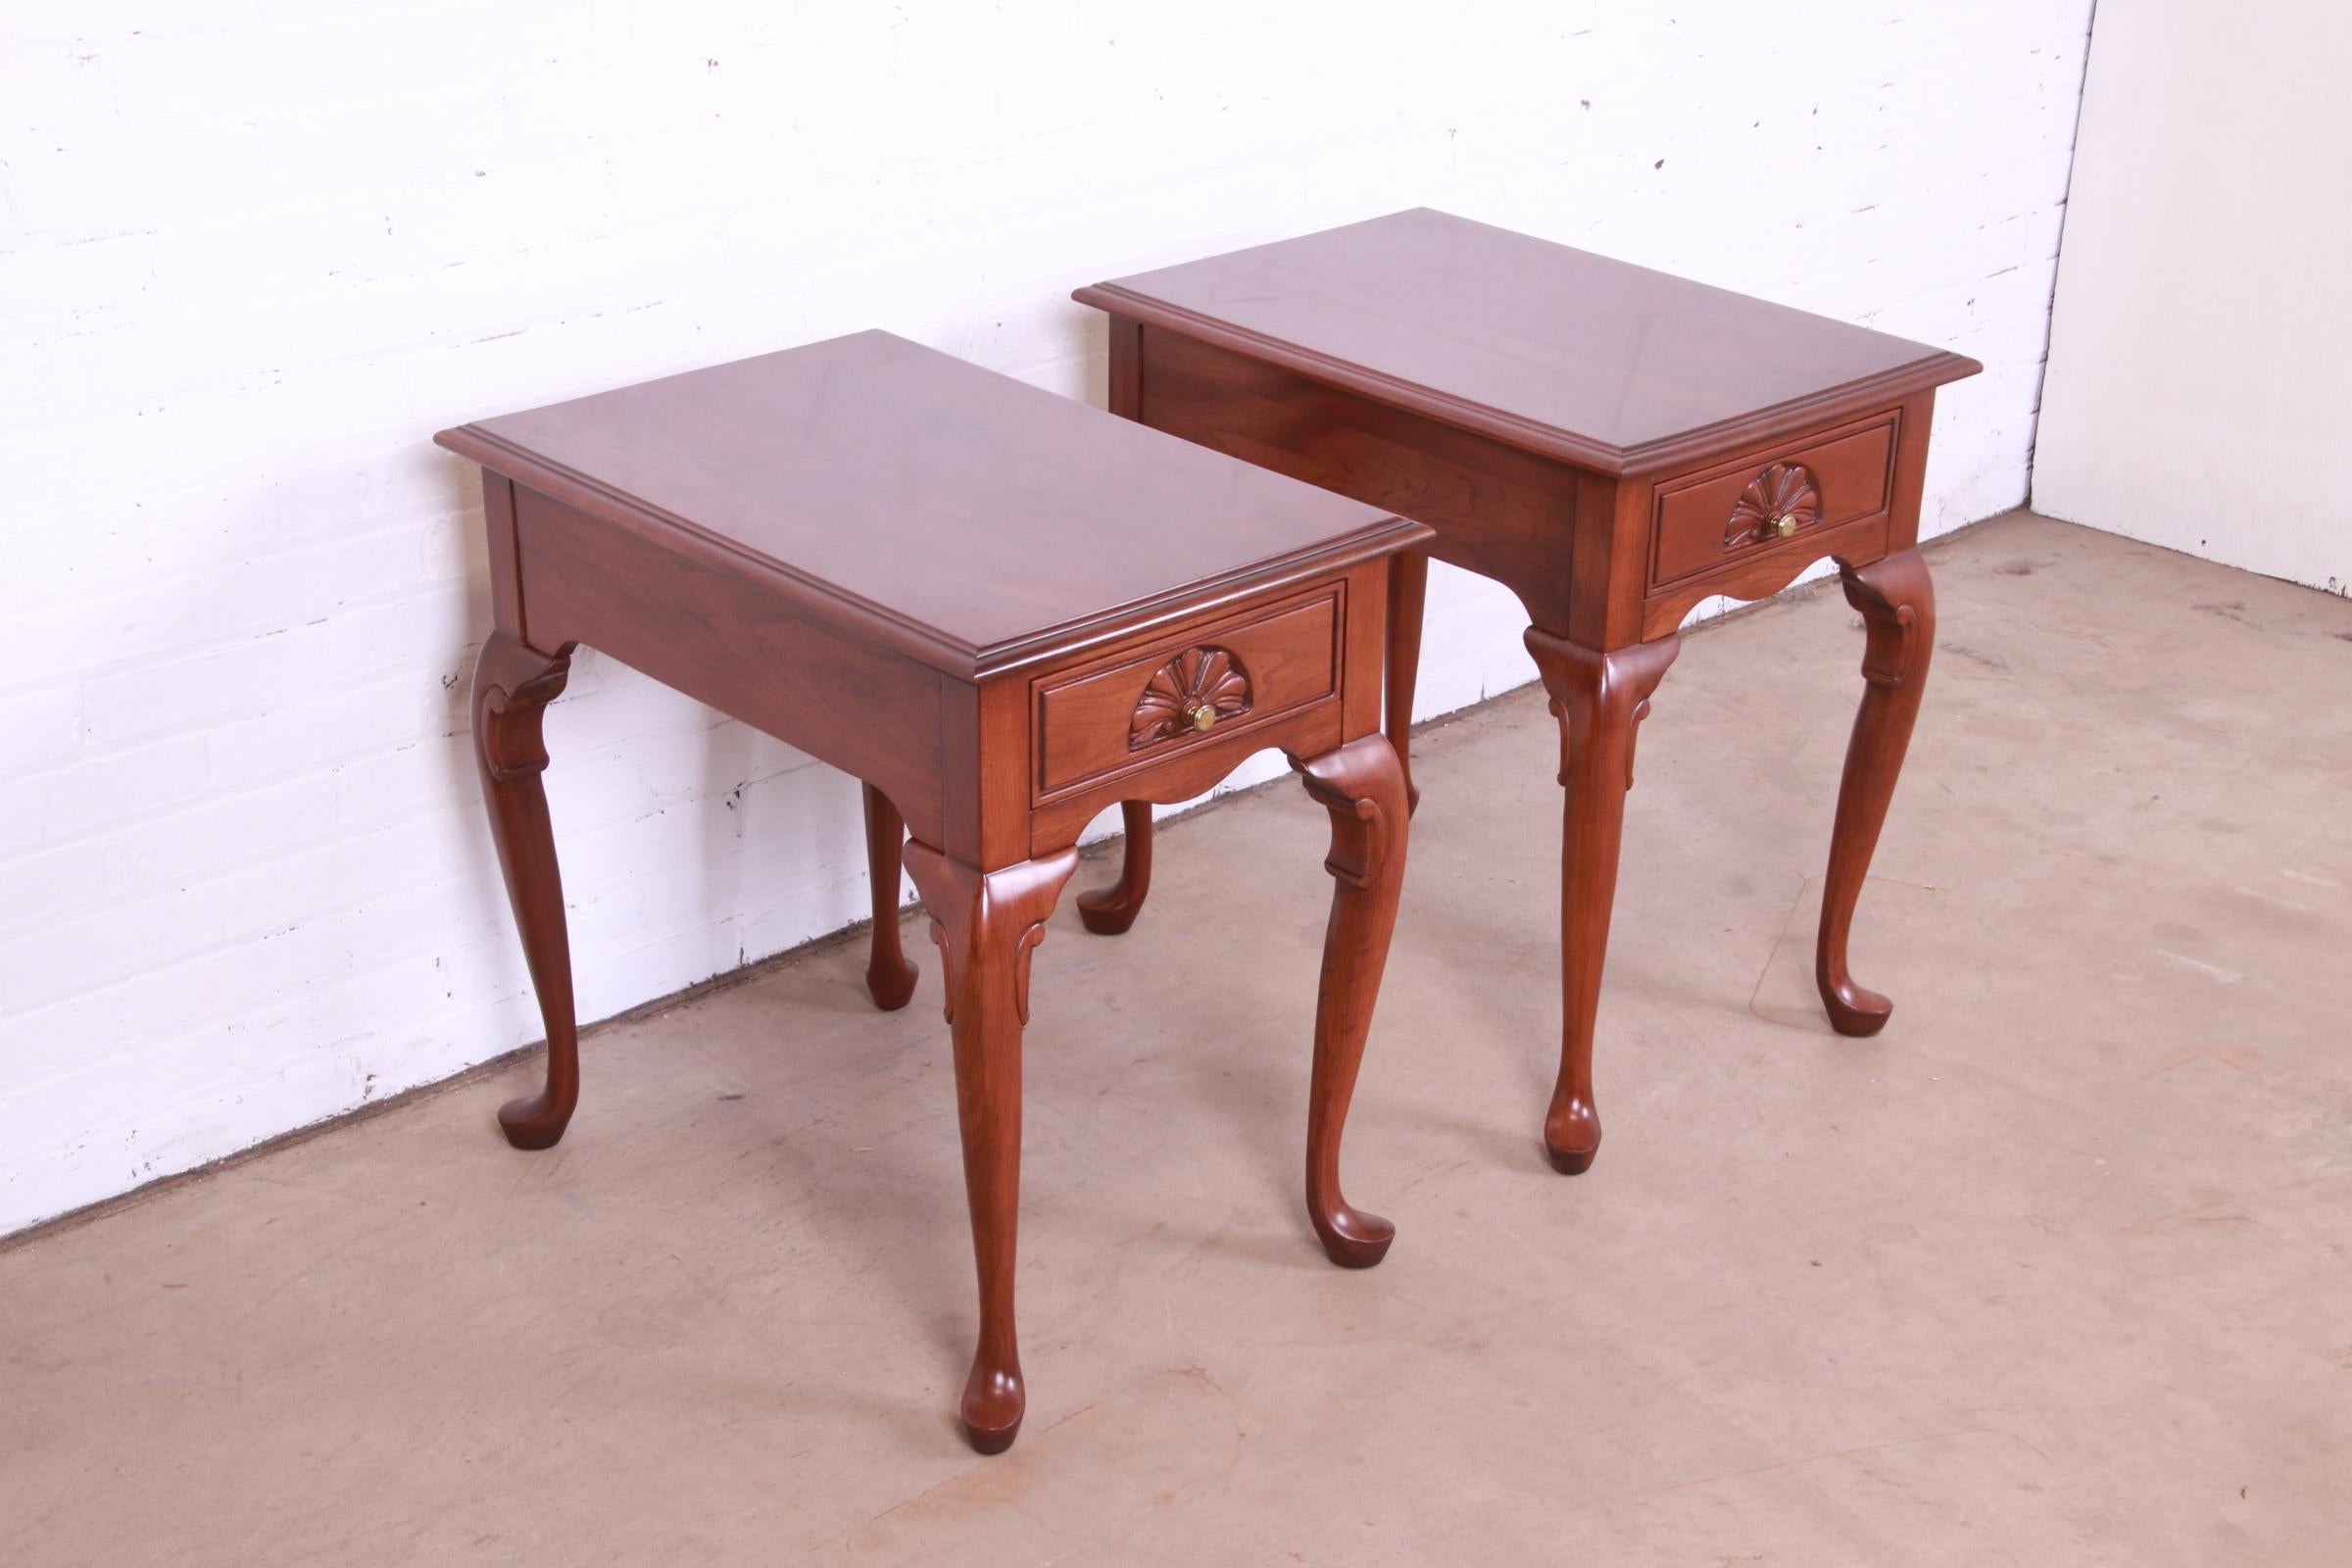 American Harden Furniture Queen Anne Solid Cherry Wood Nightstands or End Tables, Pair For Sale